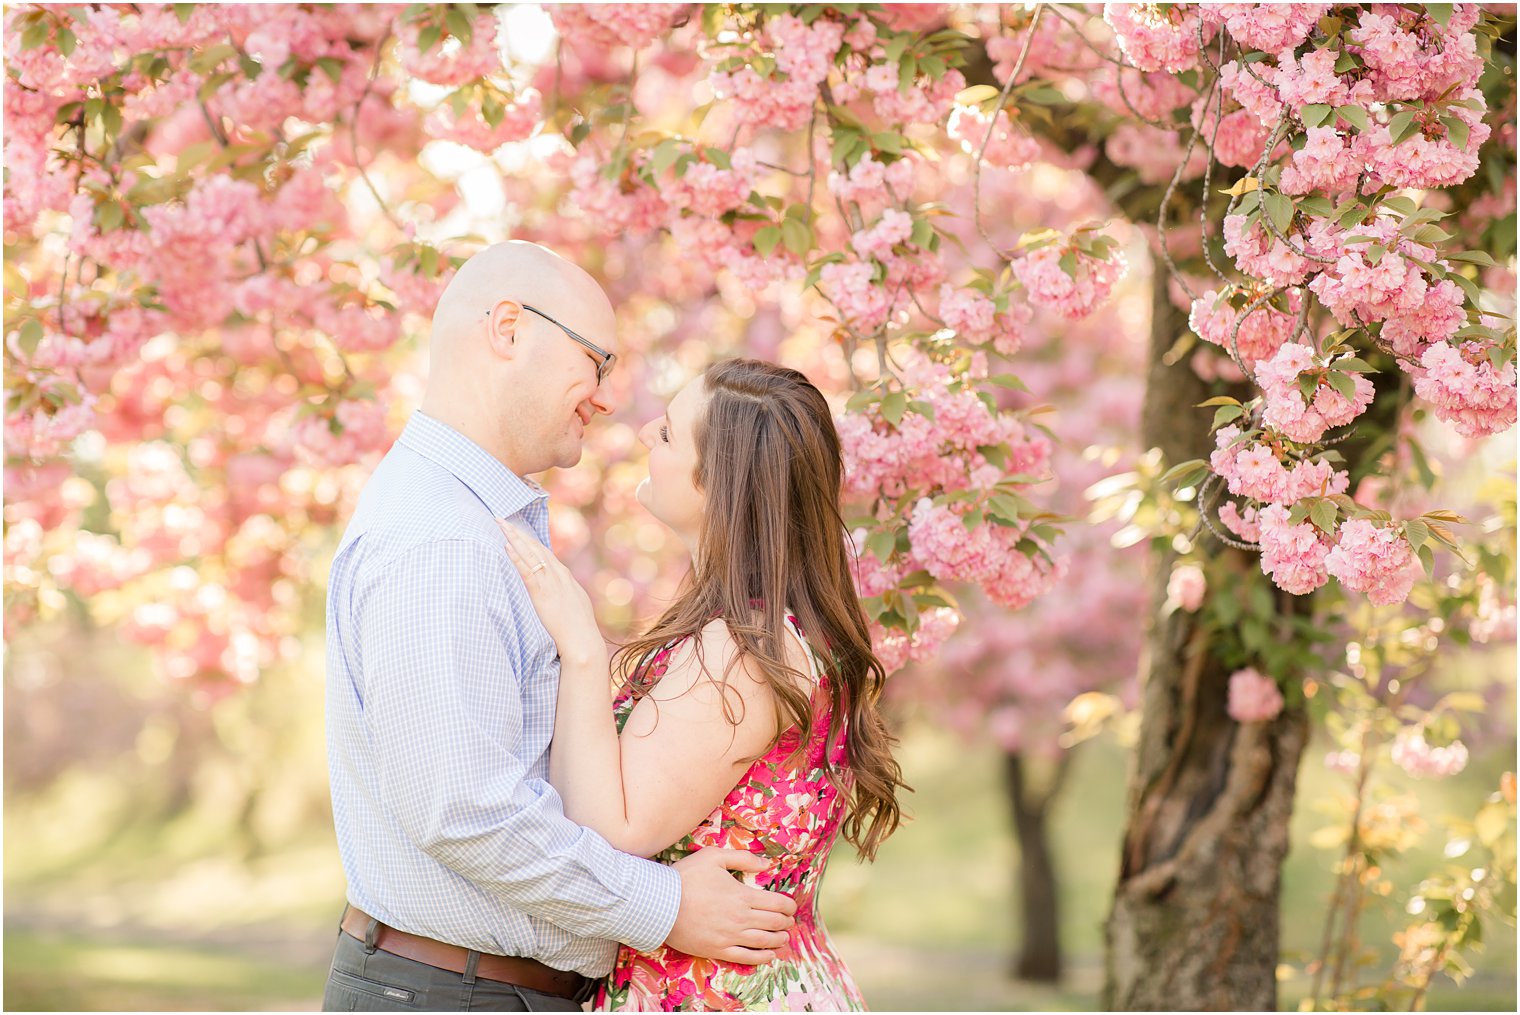 Couple posing for photos among cherry blossoms in Branch Brook Park